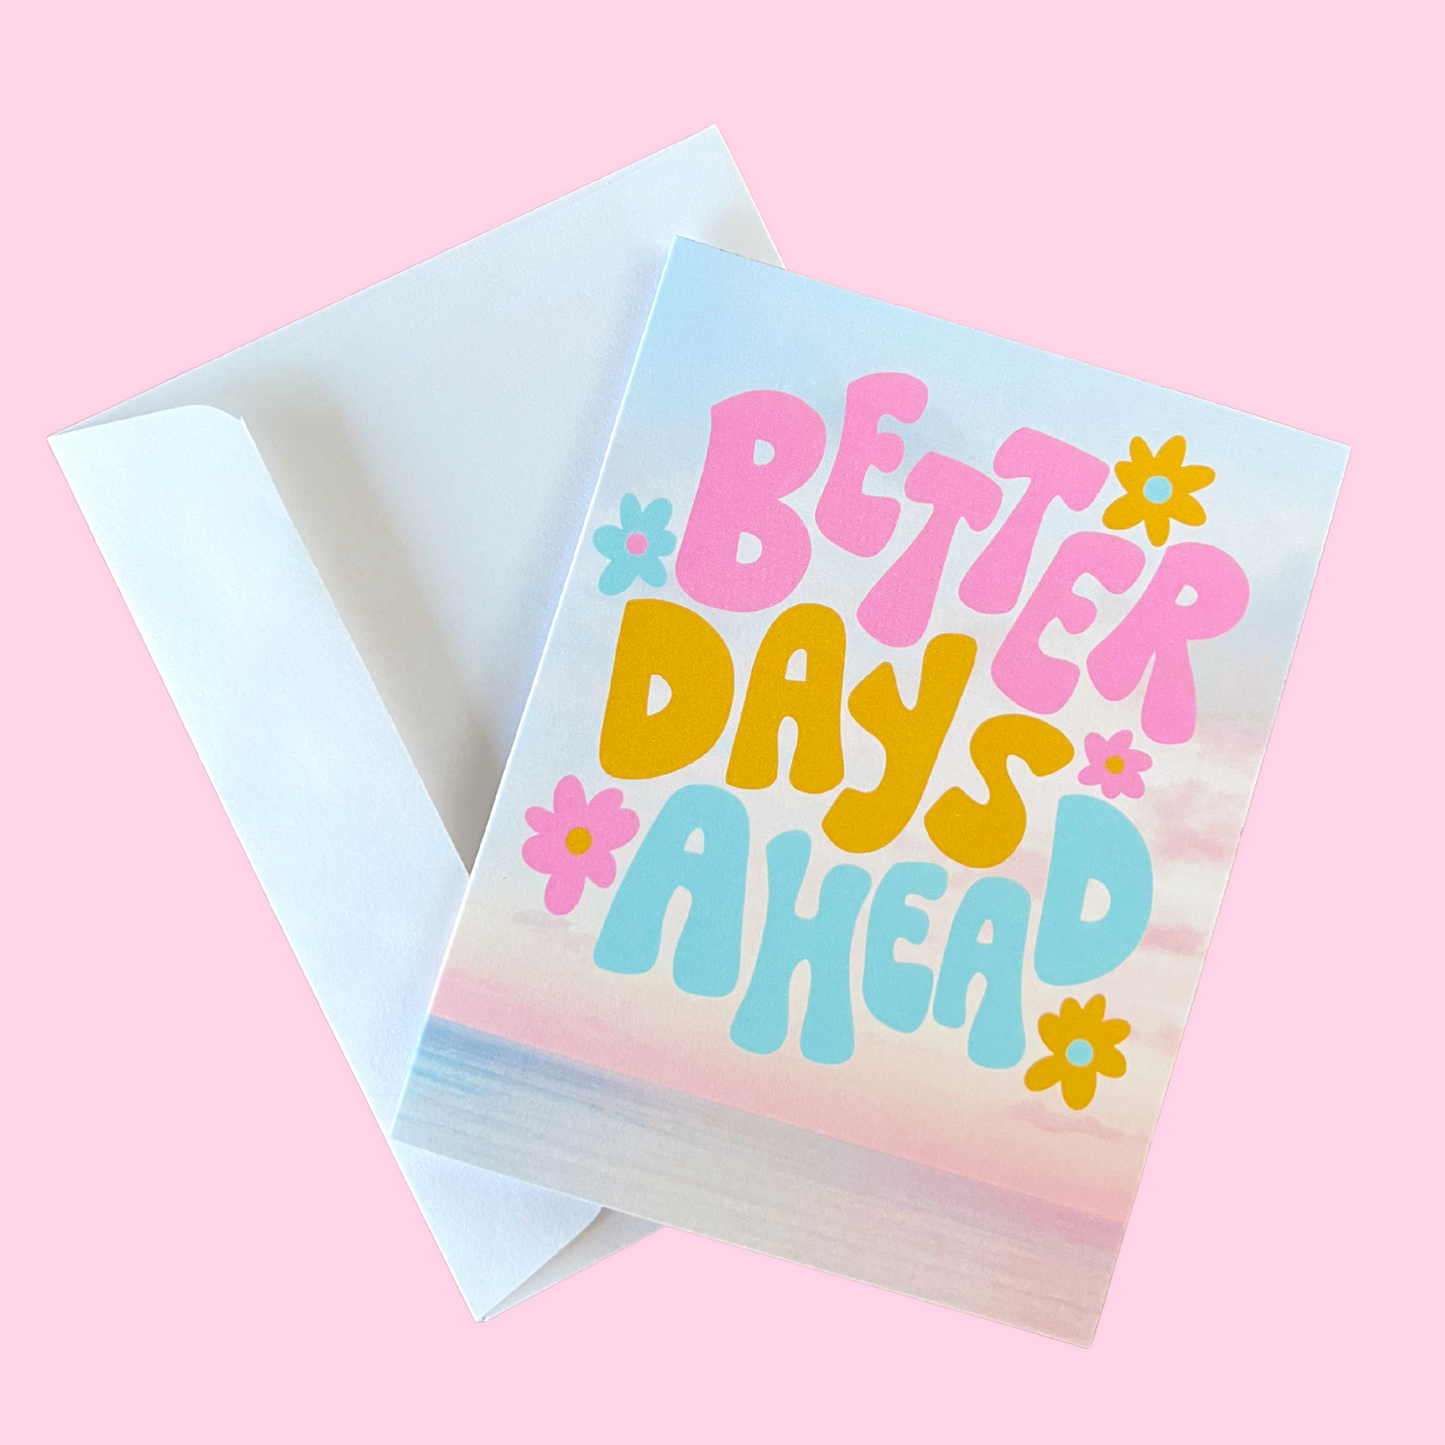 Greeting Card - Better Days Ahead